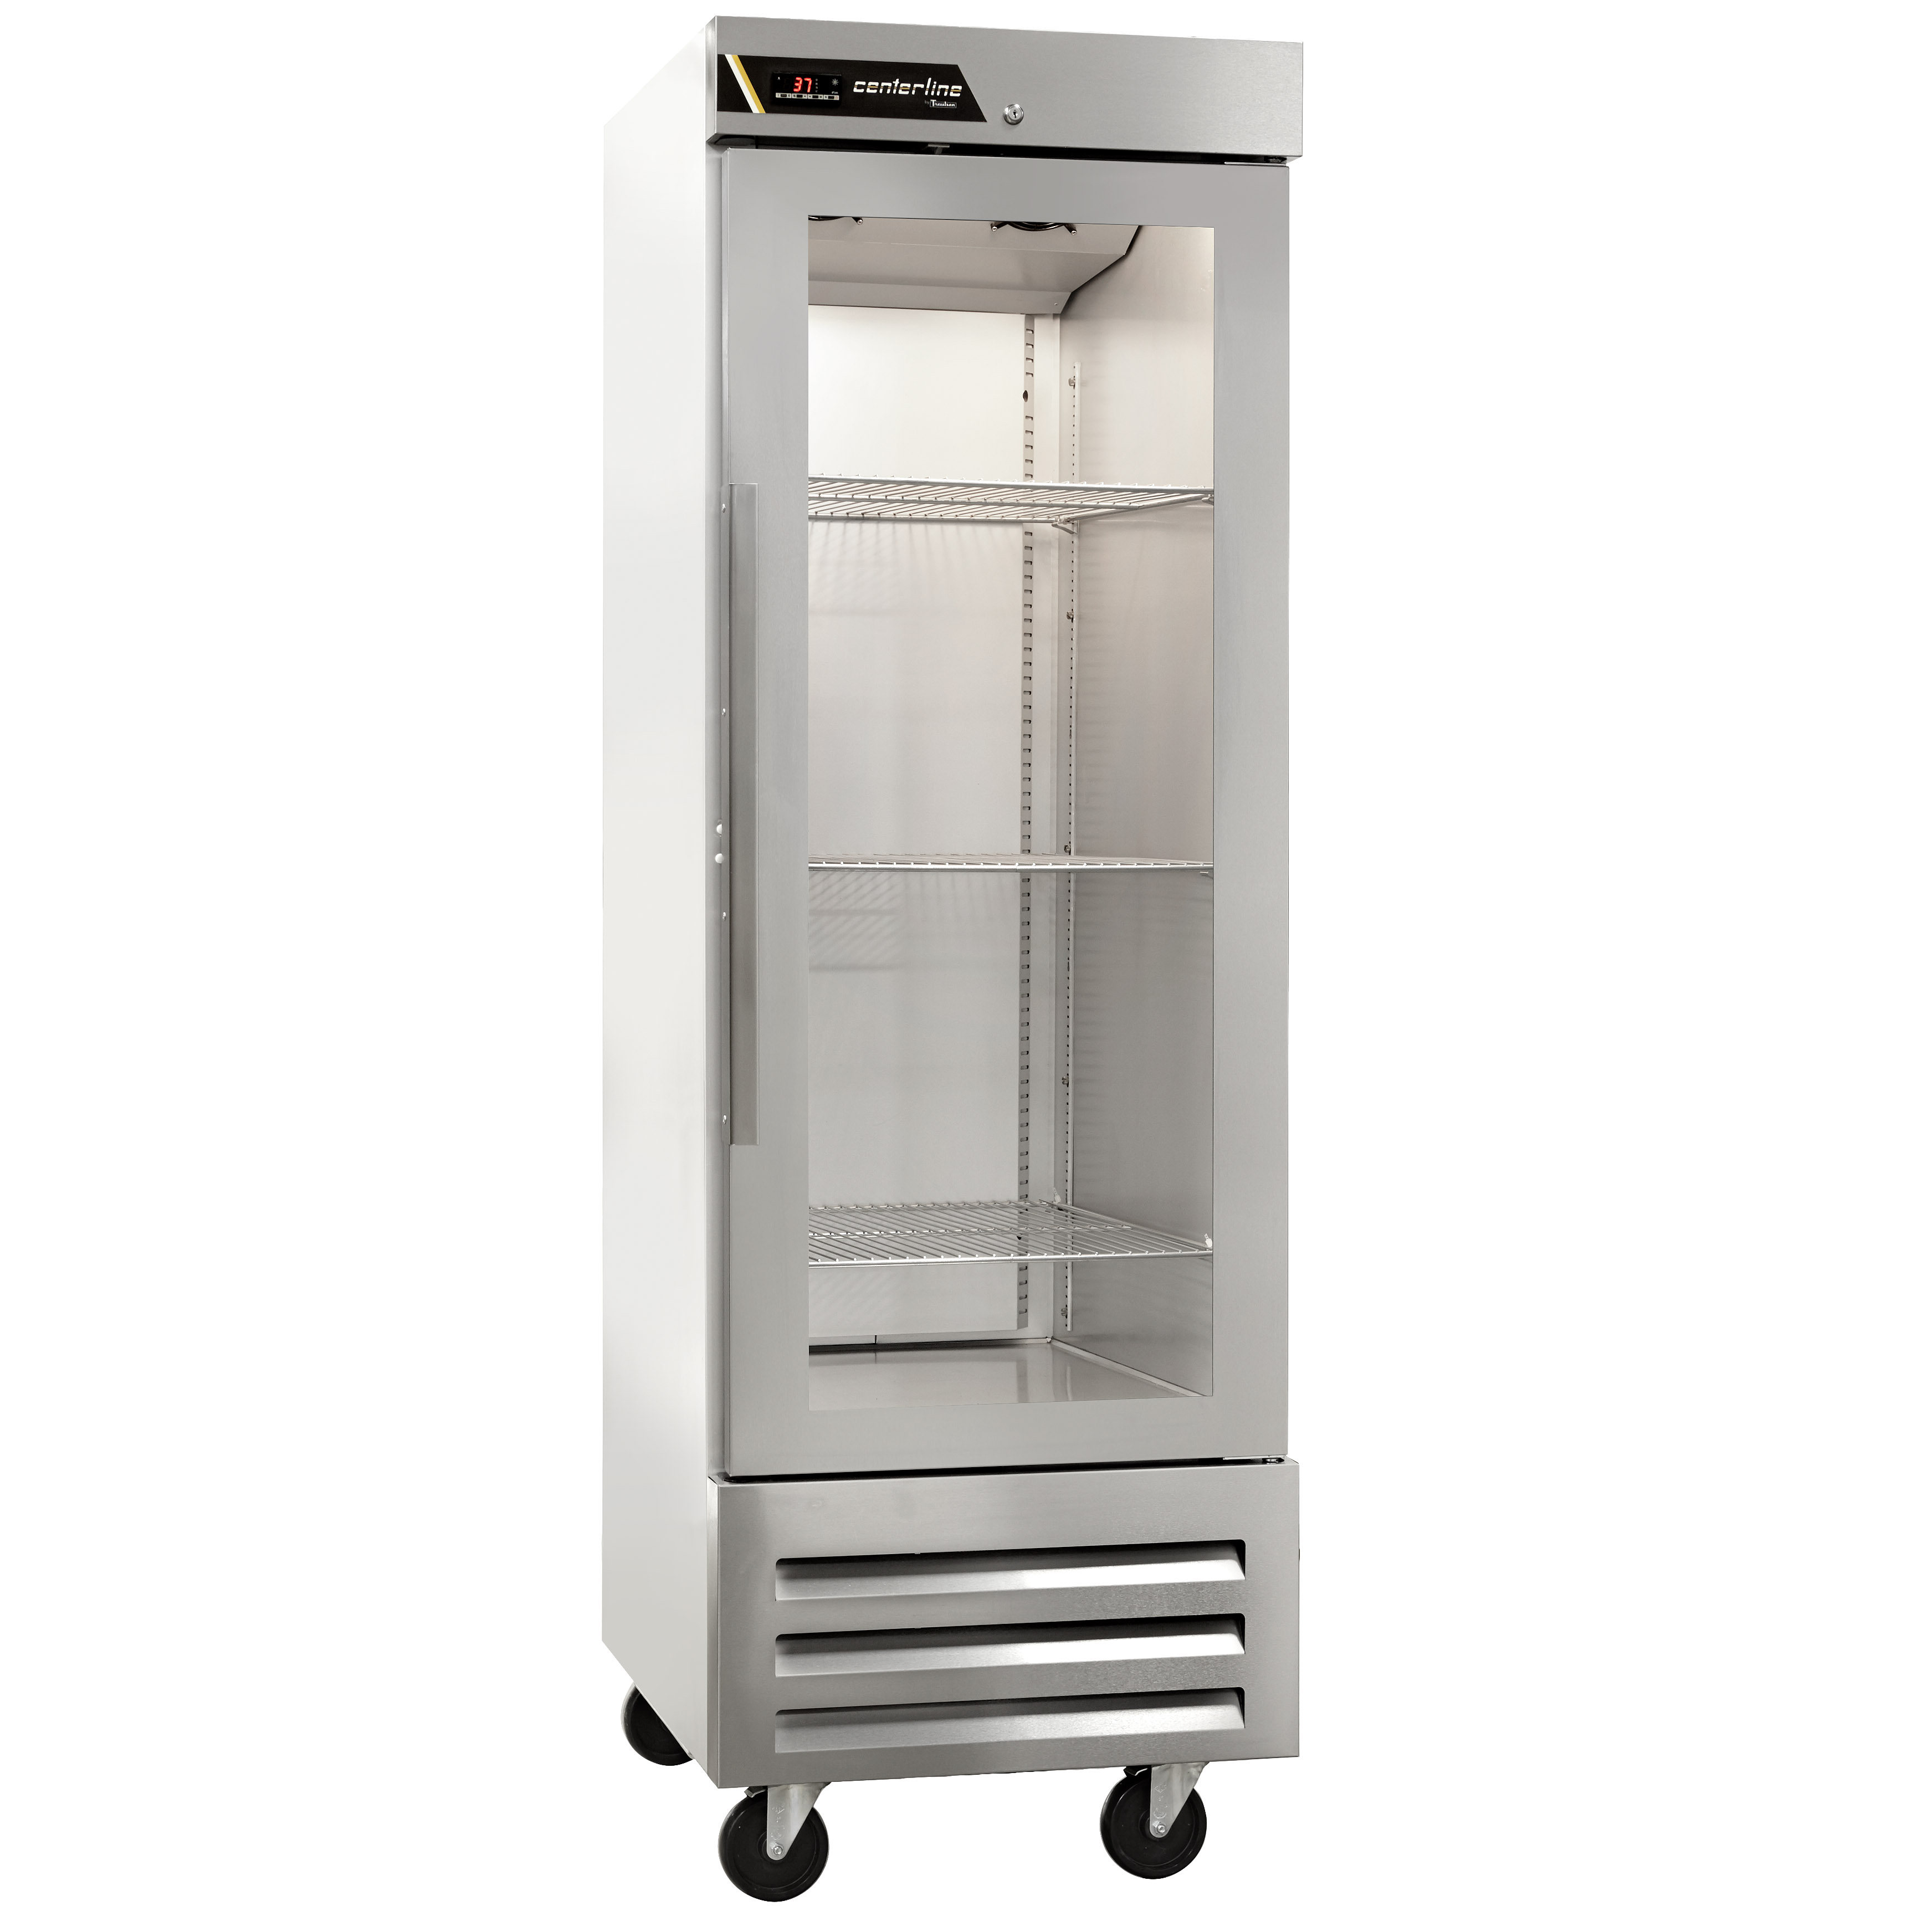 Traulsen CLBM-23R-FG-L One Section Glass Door Reach-In Refrigerator, 20.5 cu. ft.